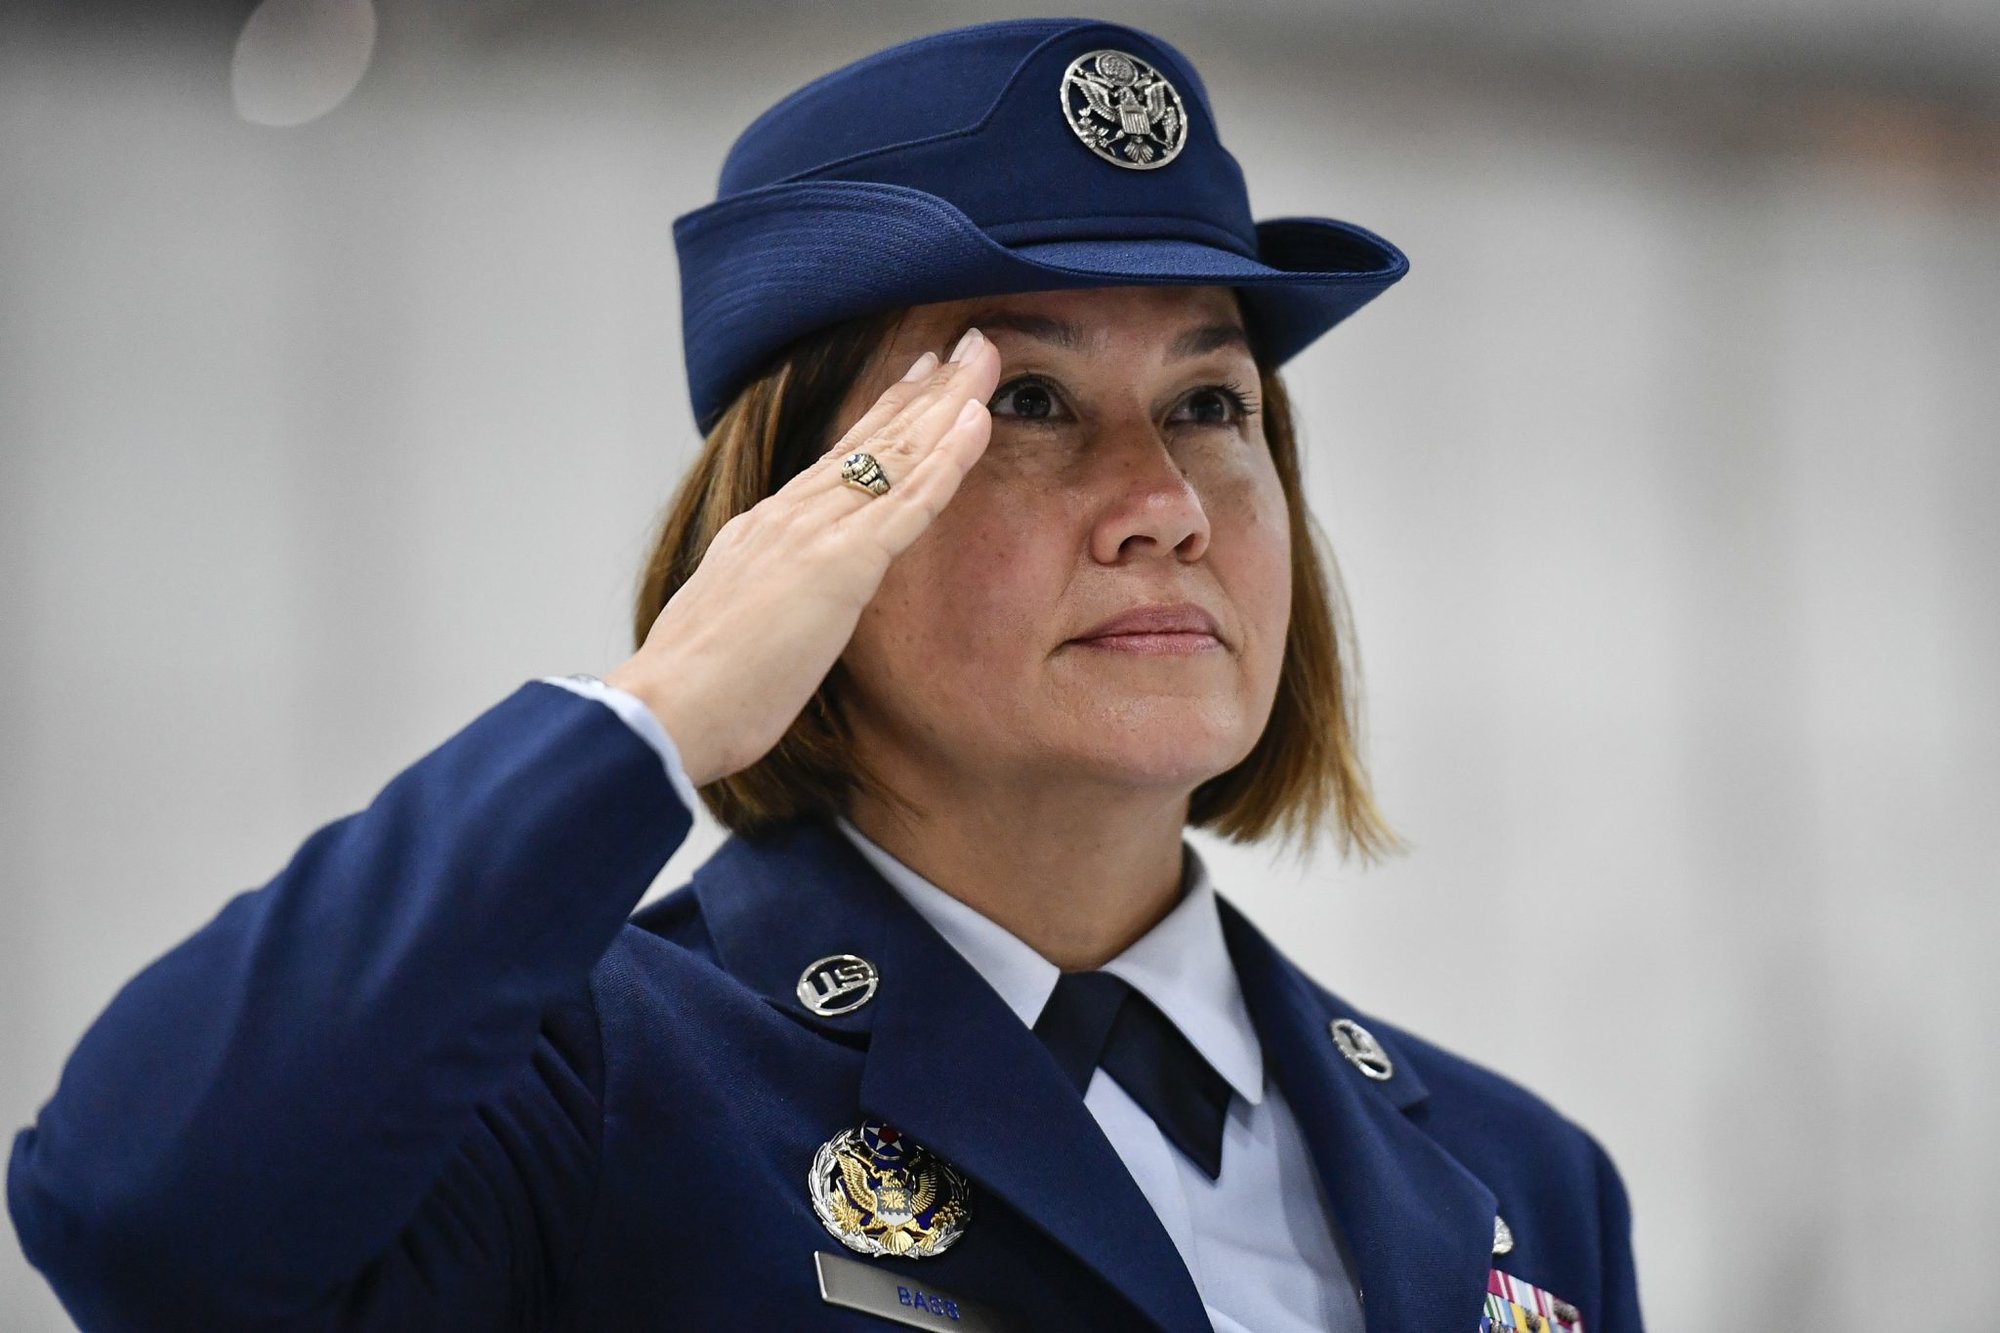 Chief Master Sgt. JoAnne S. Bass salutes during the national anthem at the beginning of a transition ceremony at Joint Base Andrews, Md., Aug. 14, 2020. Bass succeeded Chief Master Sgt. of the Air Force Kaleth O. Wright as the 19th chief master sergeant of the Air Force. (U.S. Air Force photo by Eric Dietrich)